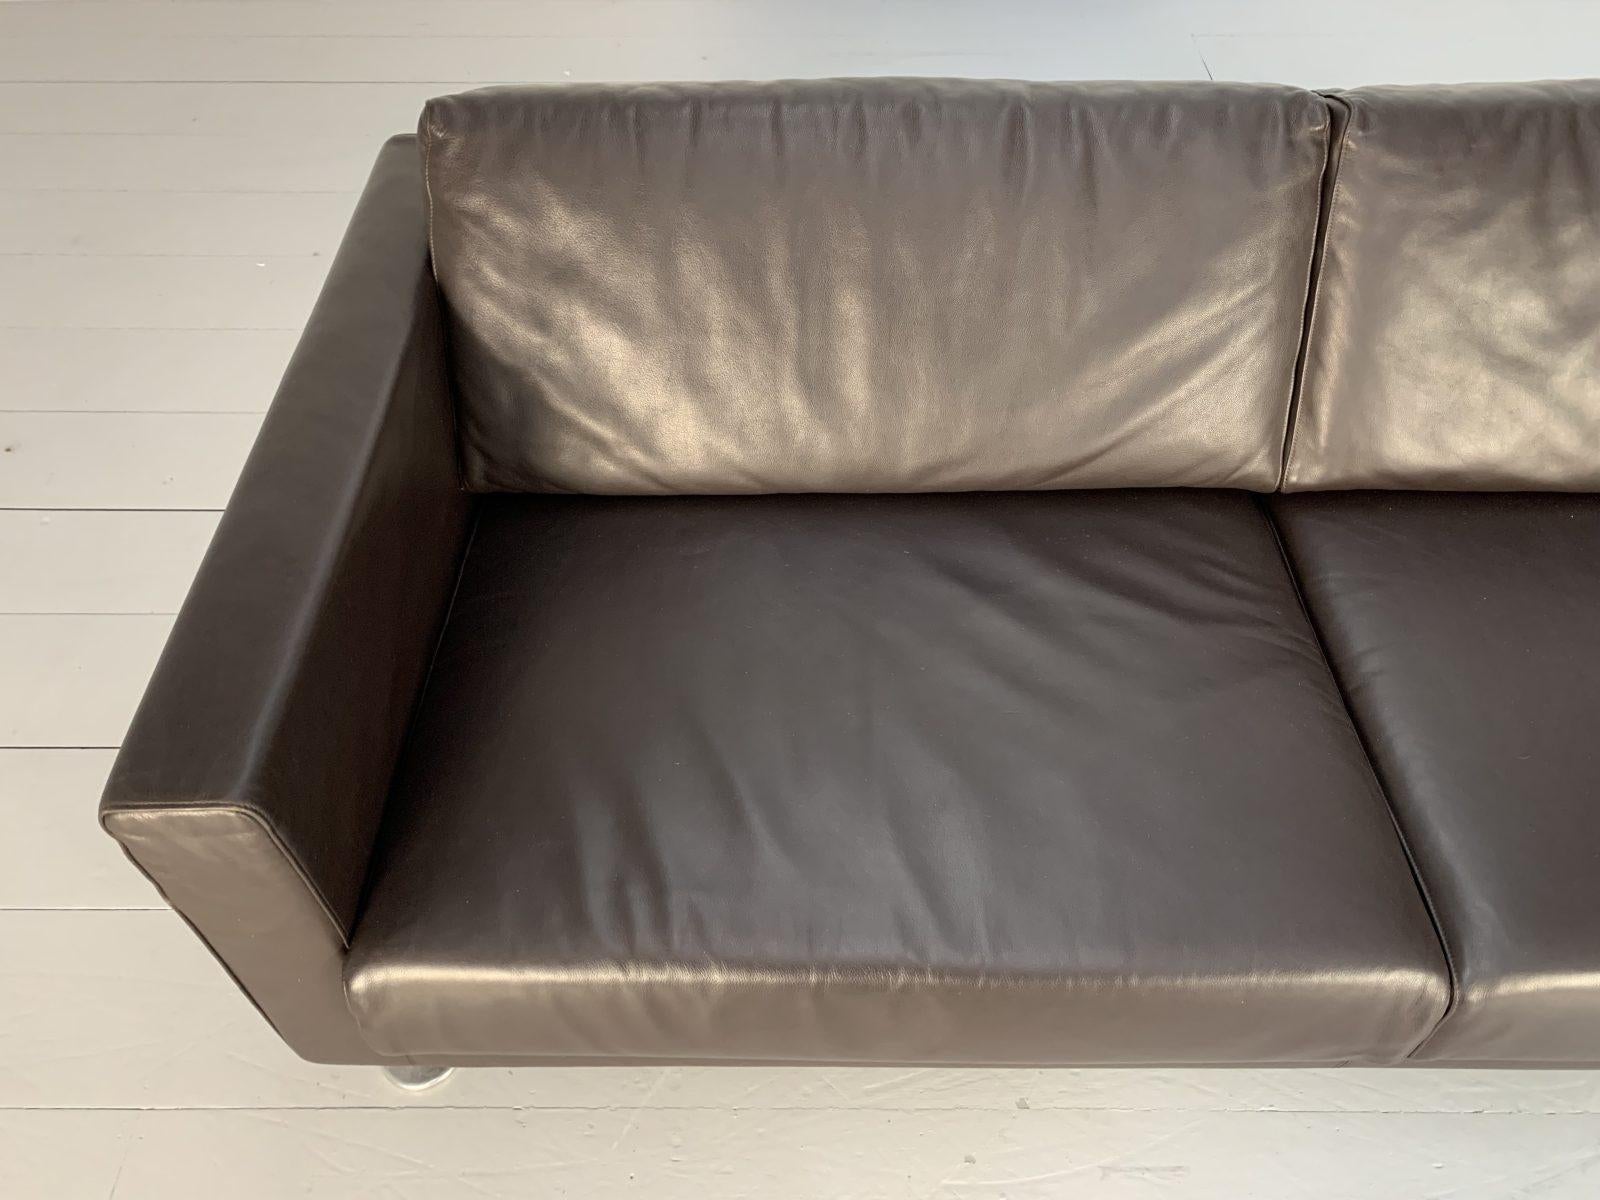 Vitra “Park” 2-Seat Sofa, in Dark Brown Leather For Sale 3